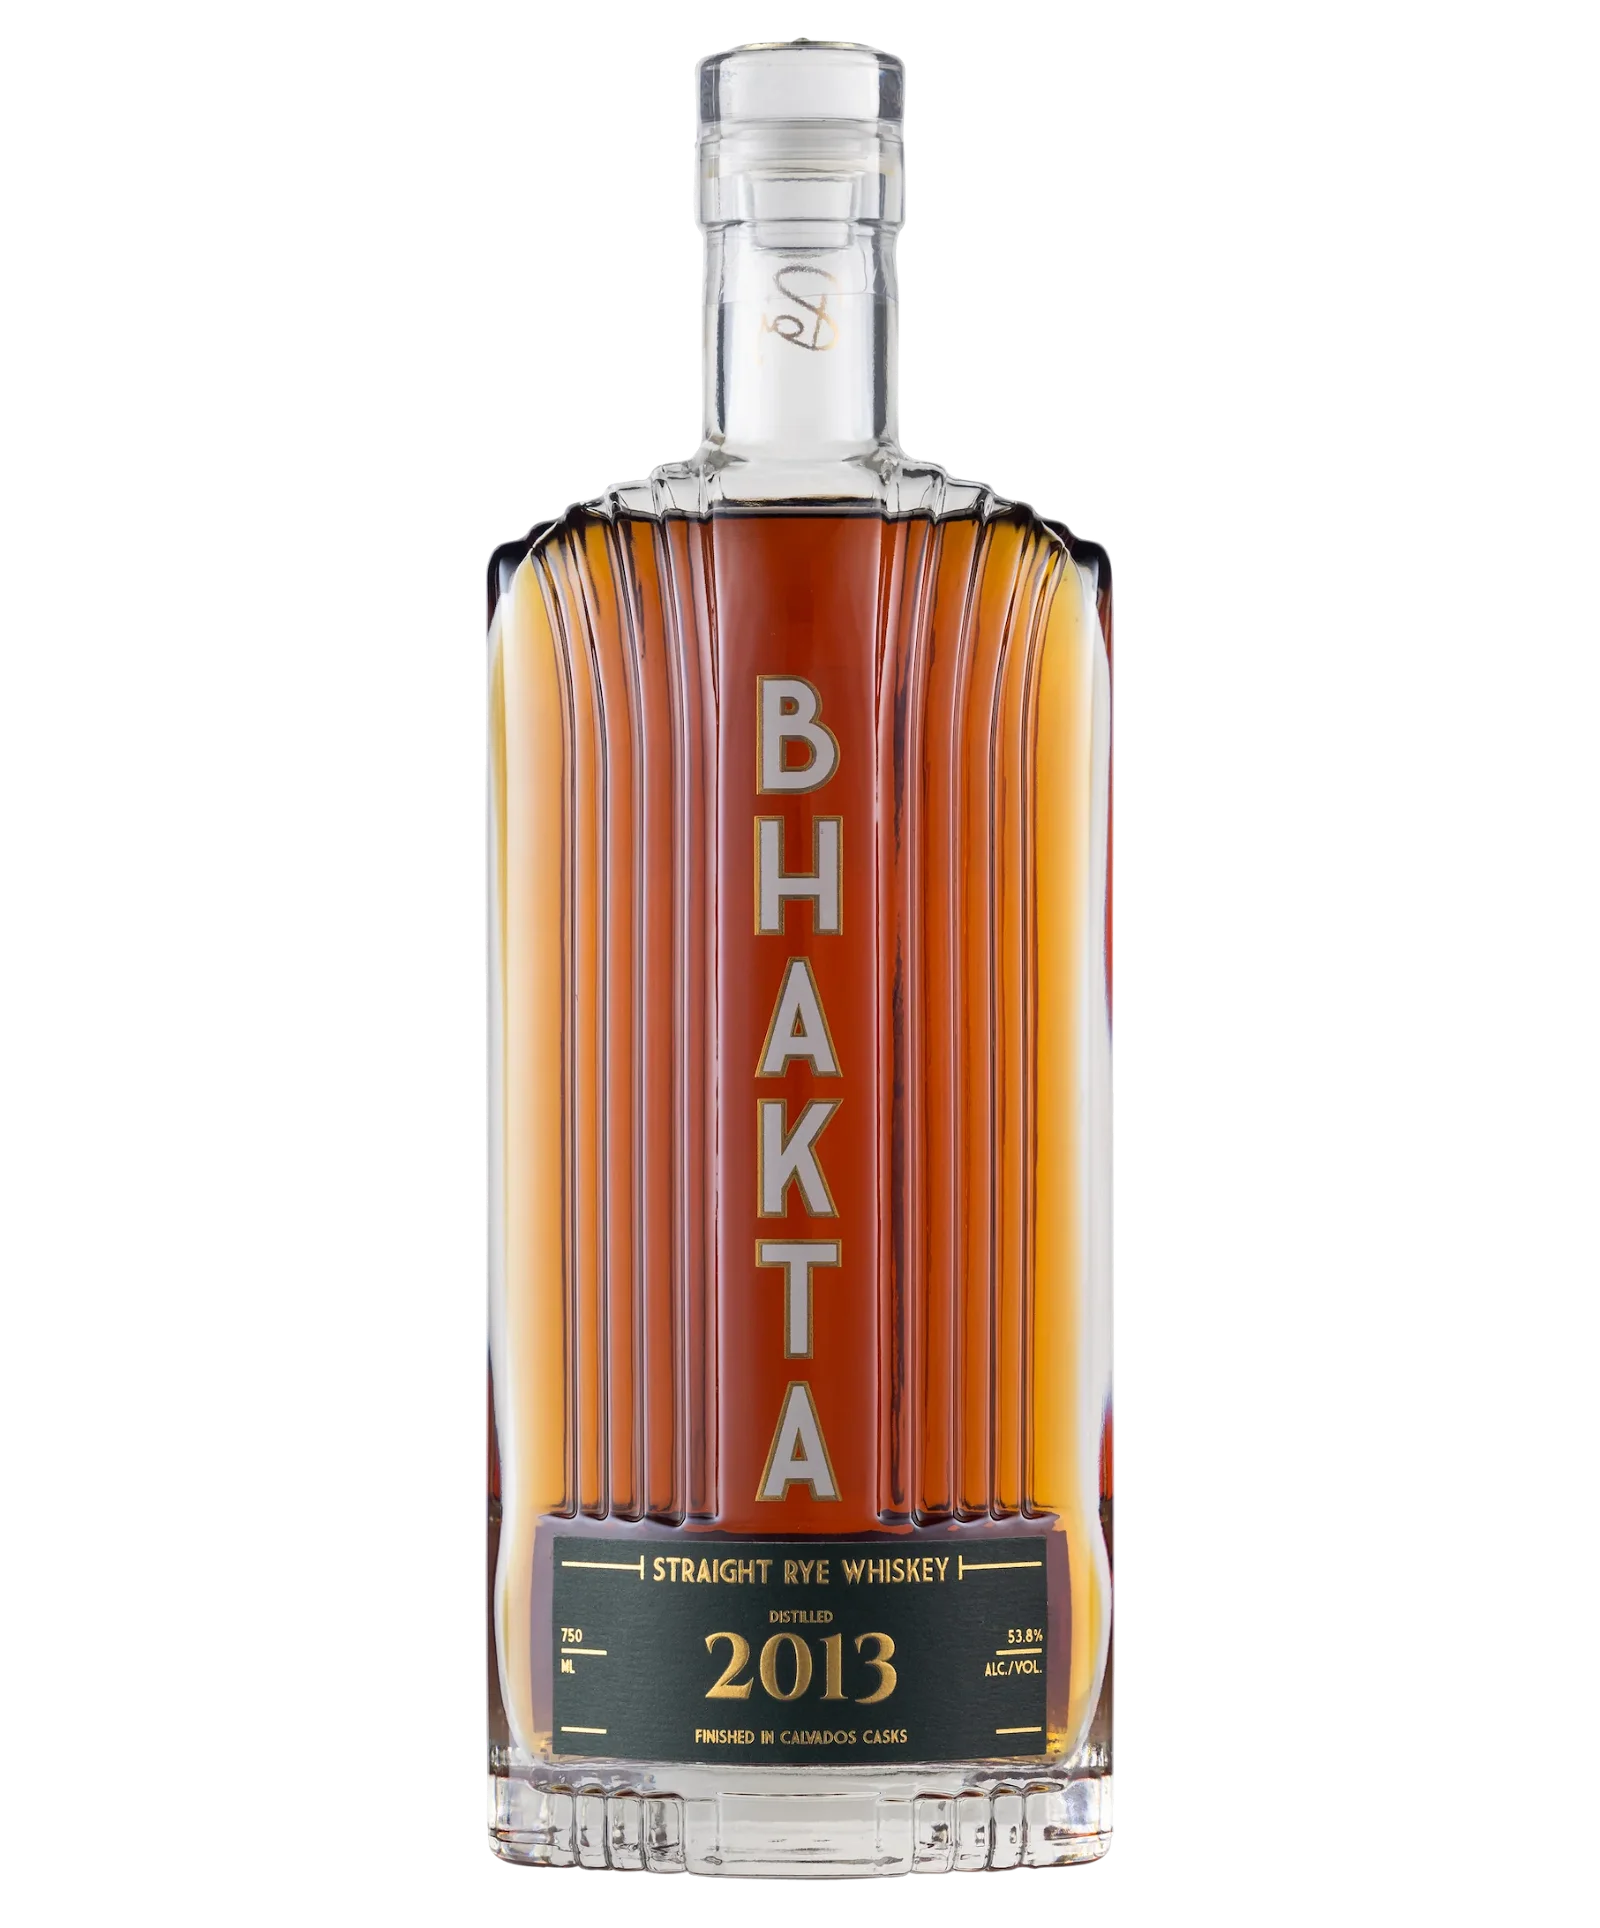 Image of BHAKTA Spirits 2013 Straight Rye Whiskey Finished in Calvados Casks